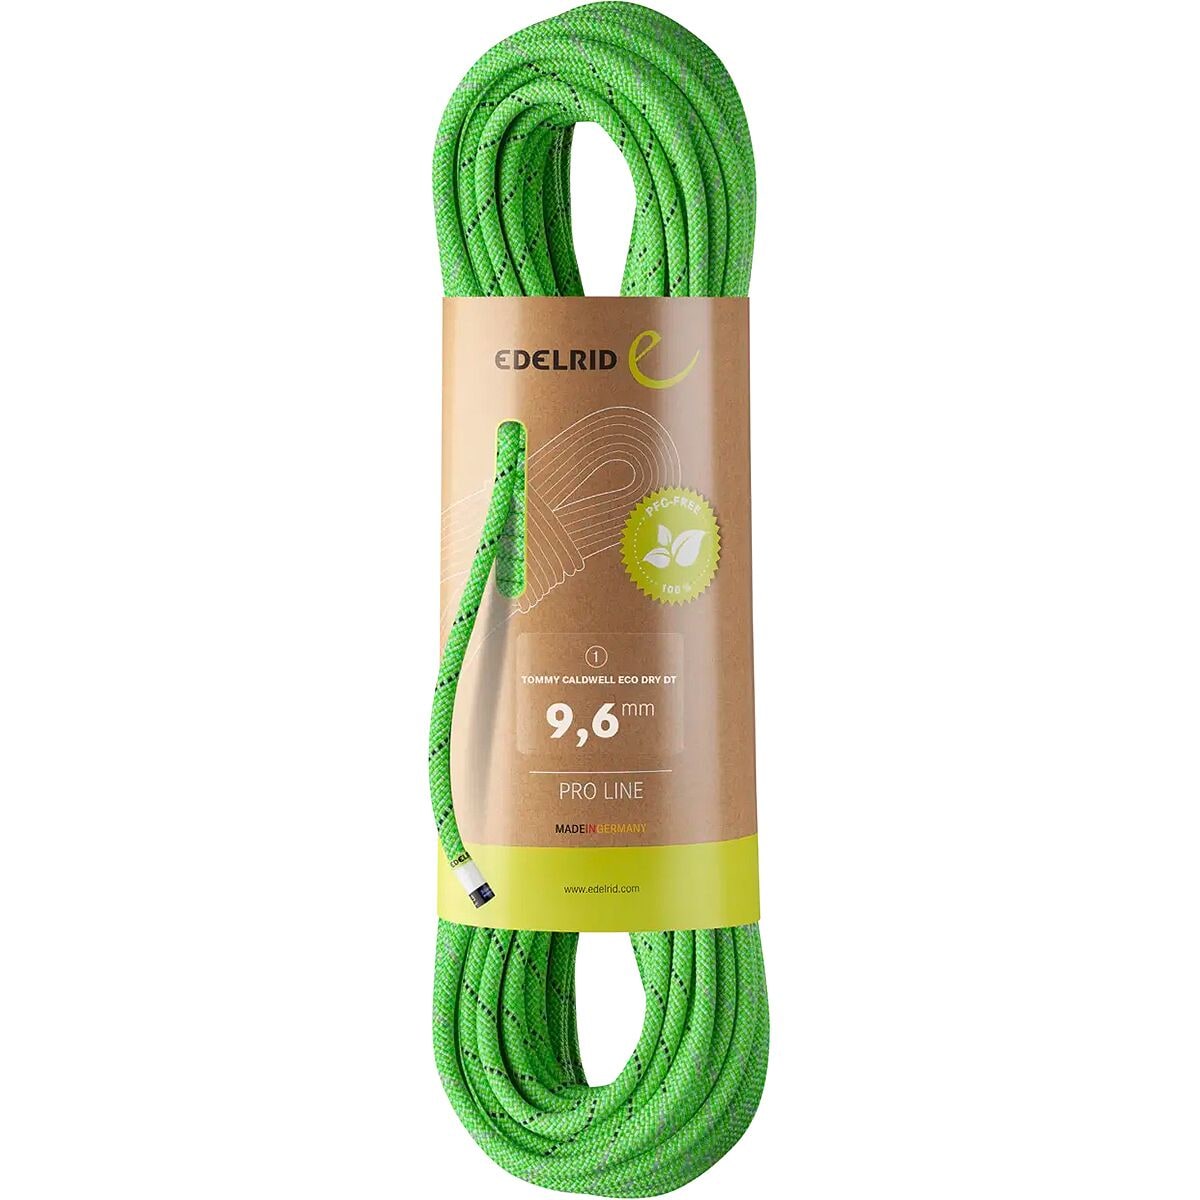 Photos - Climbing Gear Edelrid Tommy Caldwell Eco Dry DuoTec Climbing Rope - 9.6mm 